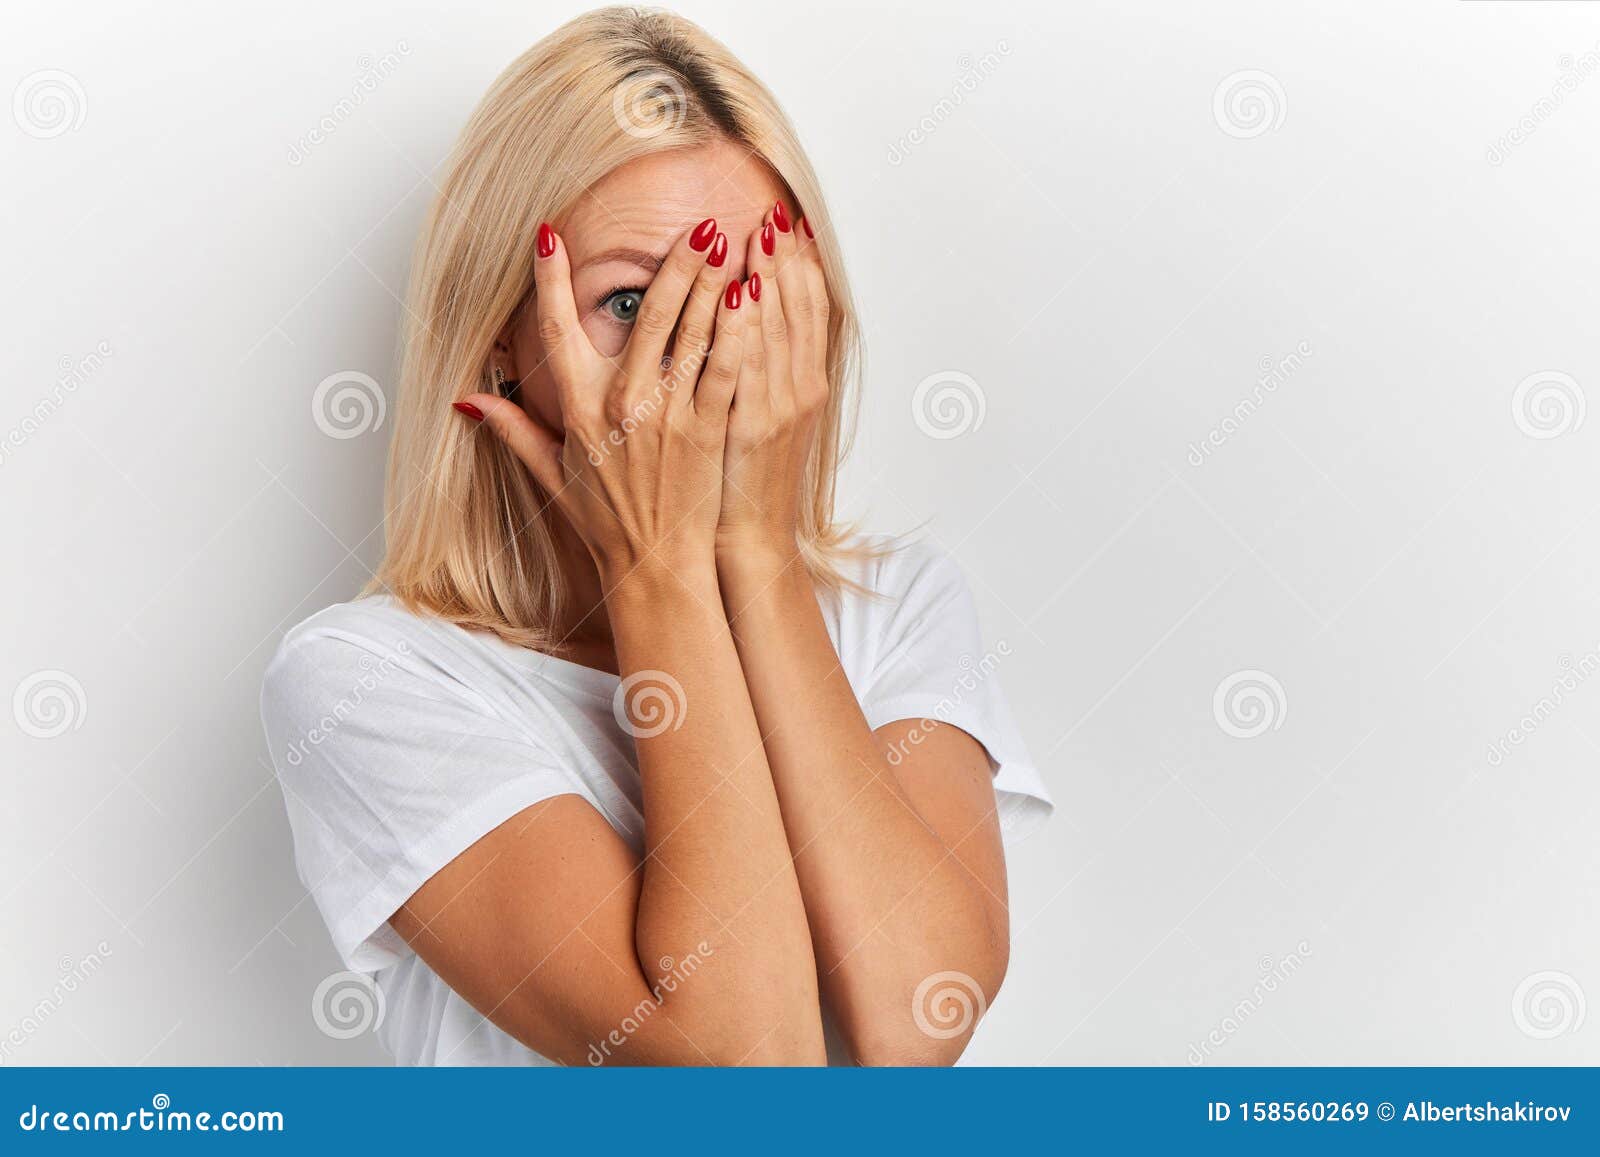 Young Fair-haired Girl Covering Face with Hands, Her Eyes Full of Terror  Stock Image - Image of embarrassment, frightened: 158560269